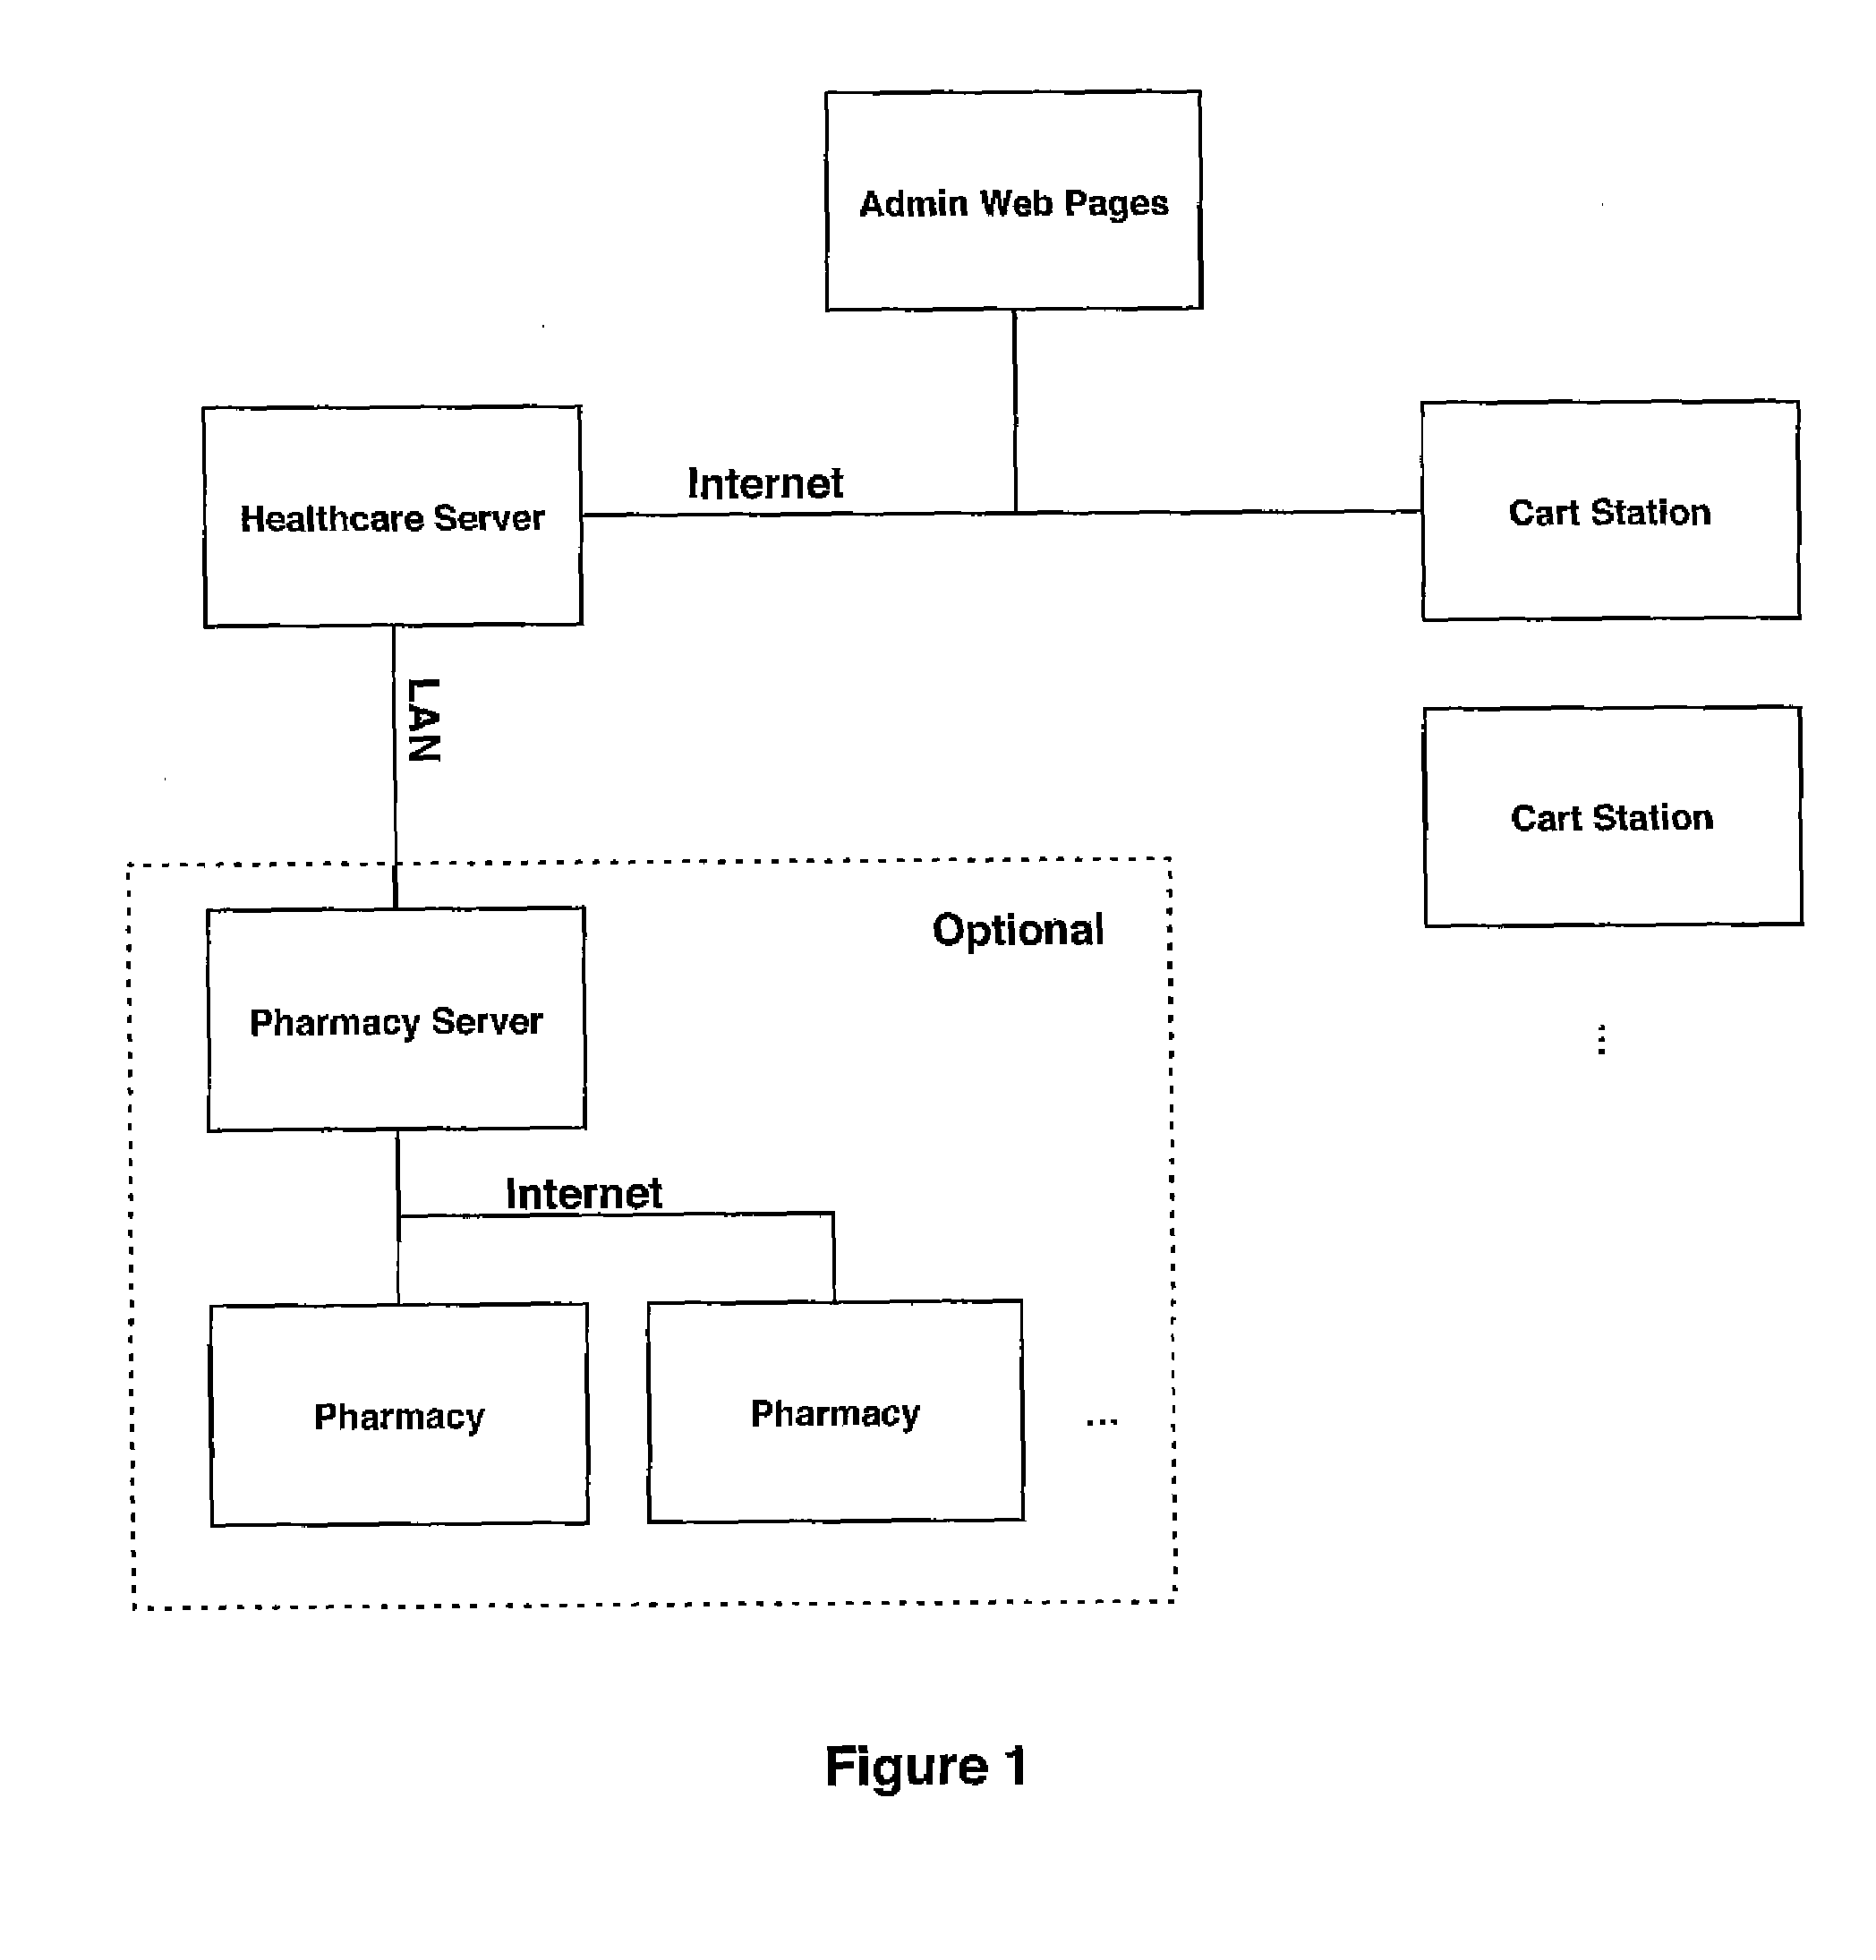 Computer-implemented system and method for electronic medication administration records